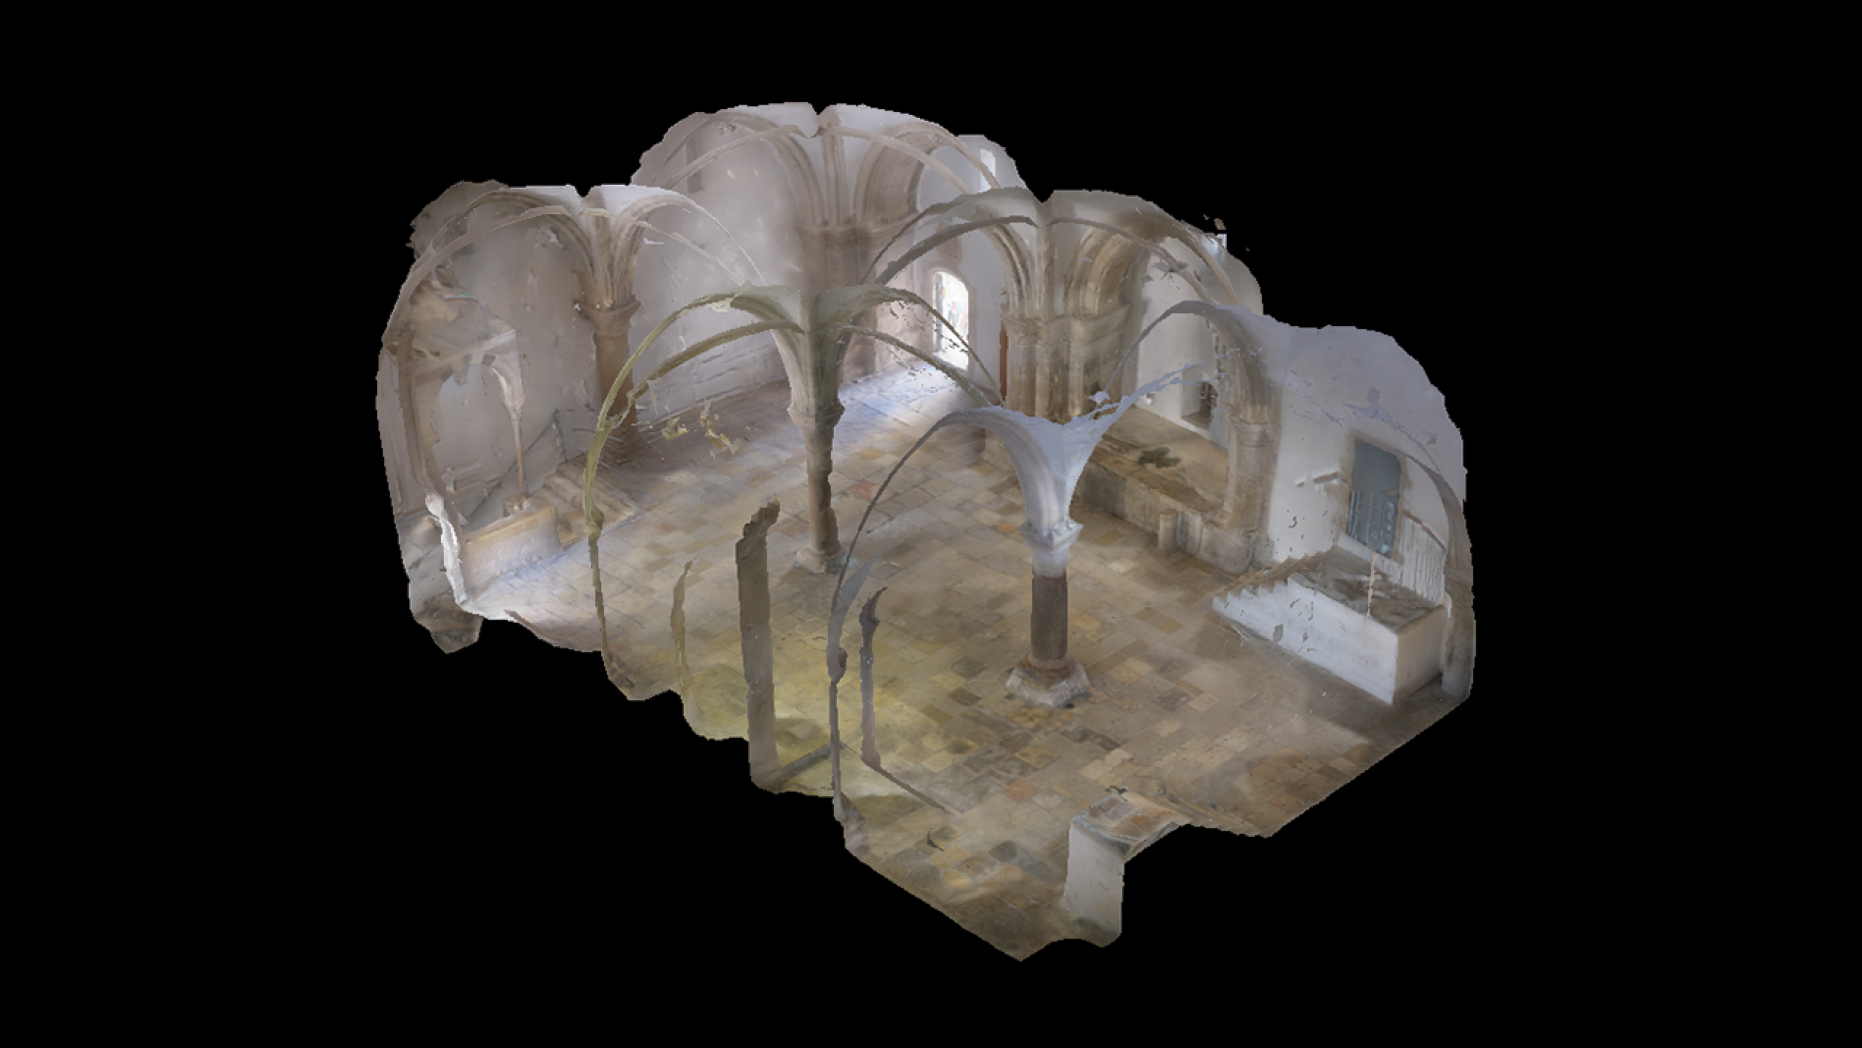 web3-3-3d-scans-please-note-that-3d-documentation-work-was-done-by-a-team-from-the-cyprus-institute-in-cyprus-in-collaboration-with-israel-antiquities-authority..jpg